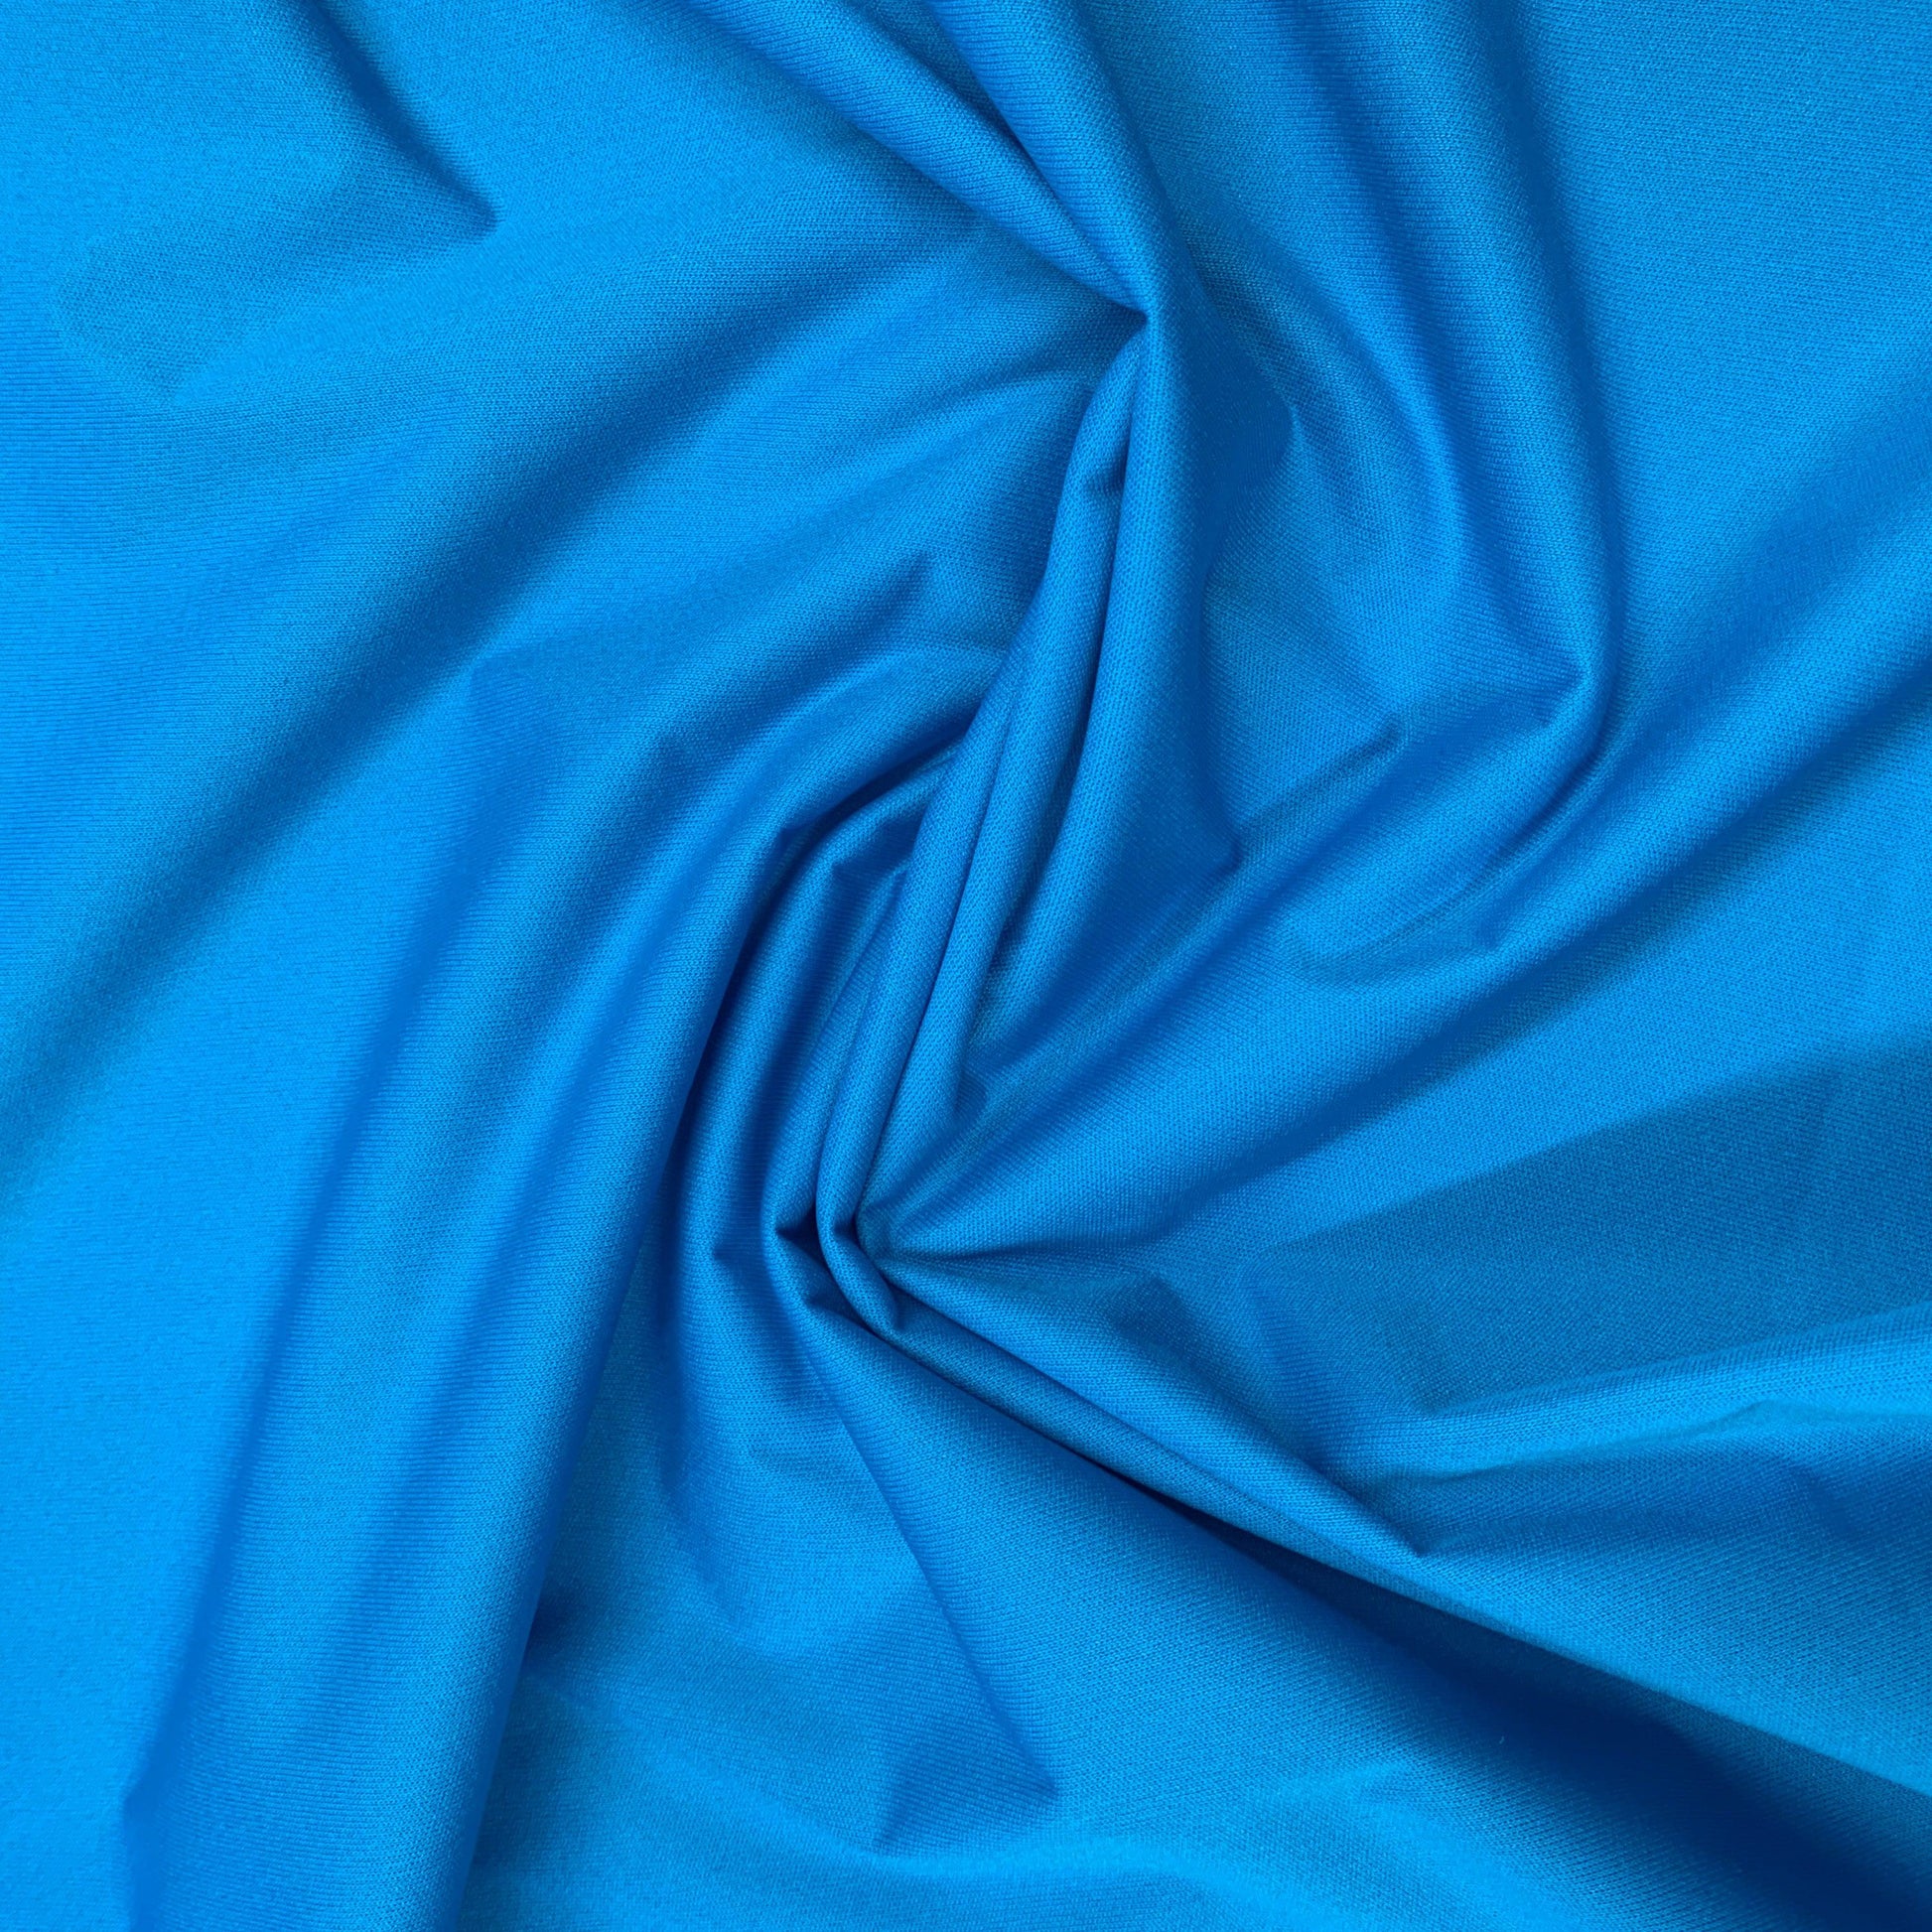 Wavecrest 1 mil PUL Fabric - Made in the USA - Nature's Fabrics